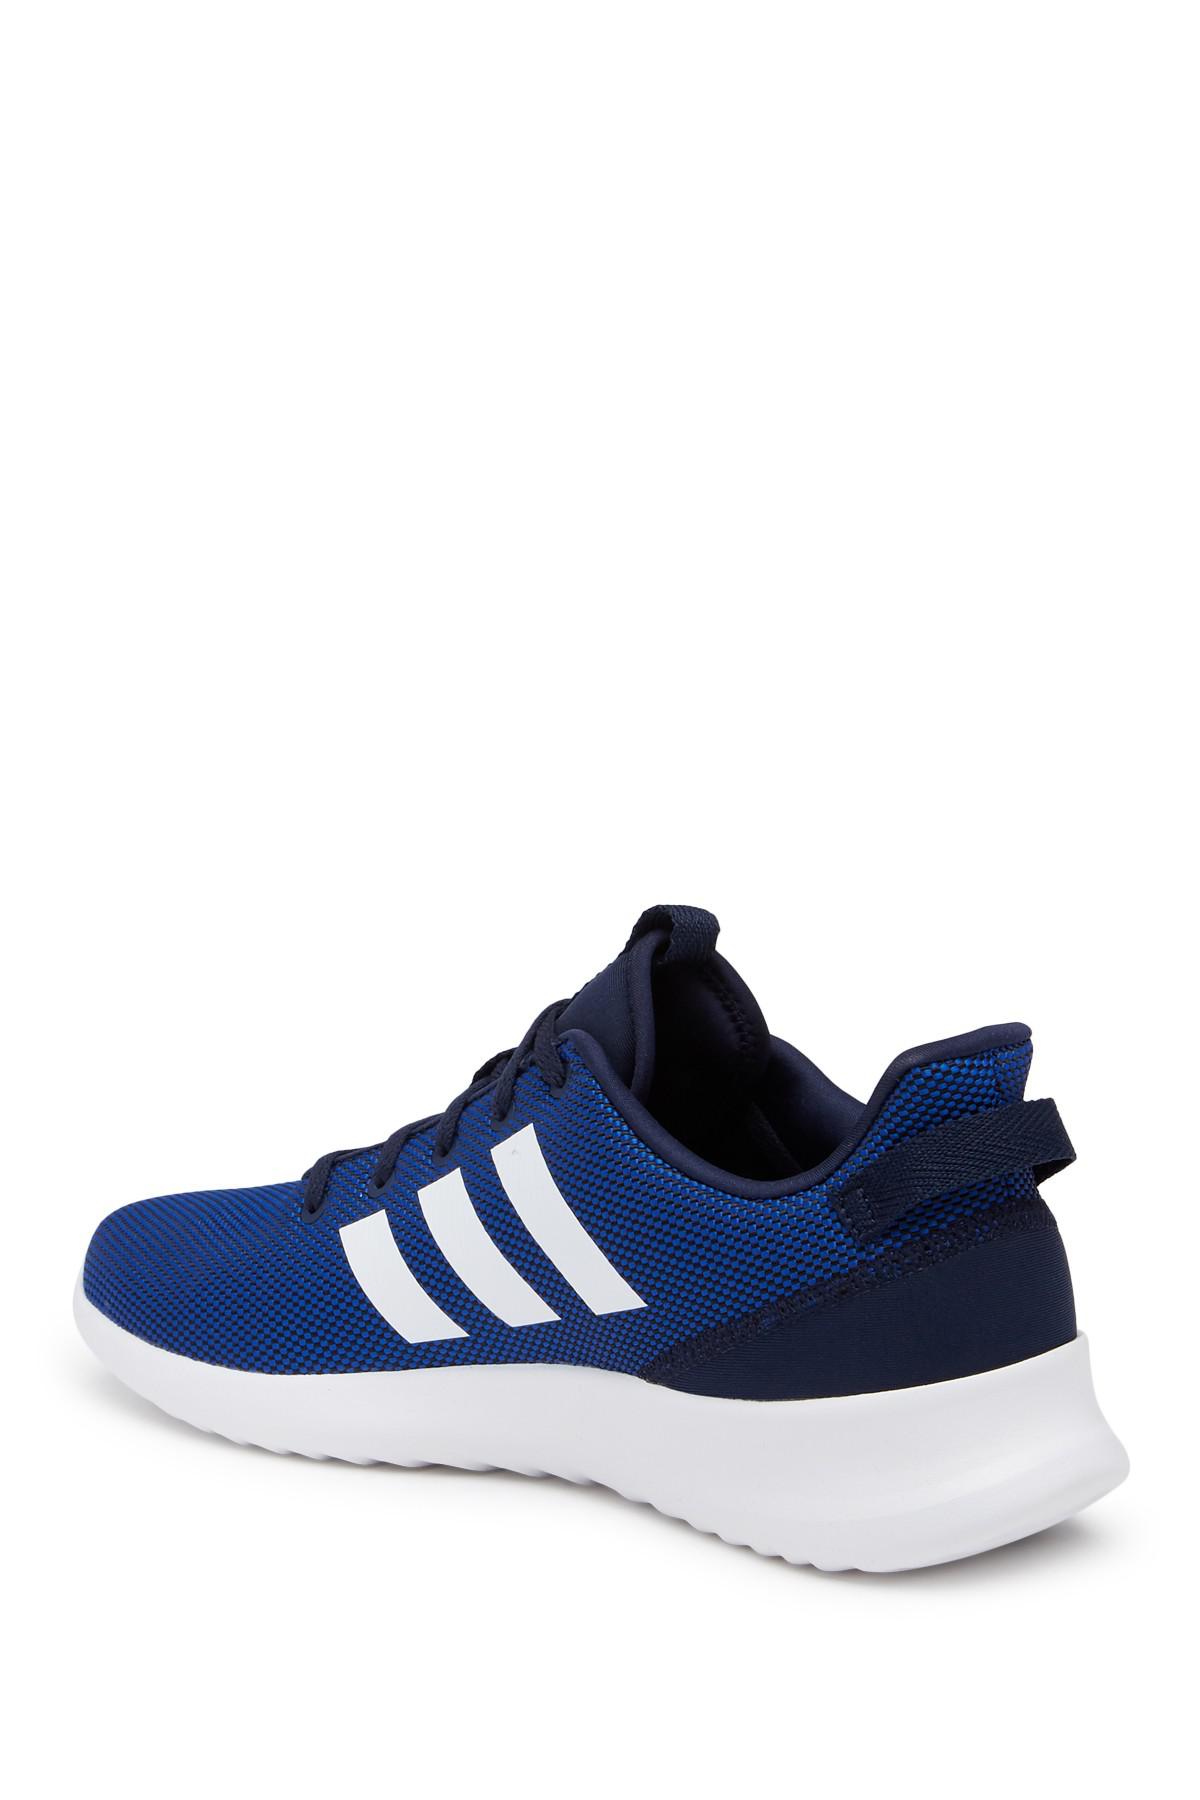 Guess Nathaniel Ward Sincerity adidas Cf Racer Tr in Blue for Men | Lyst